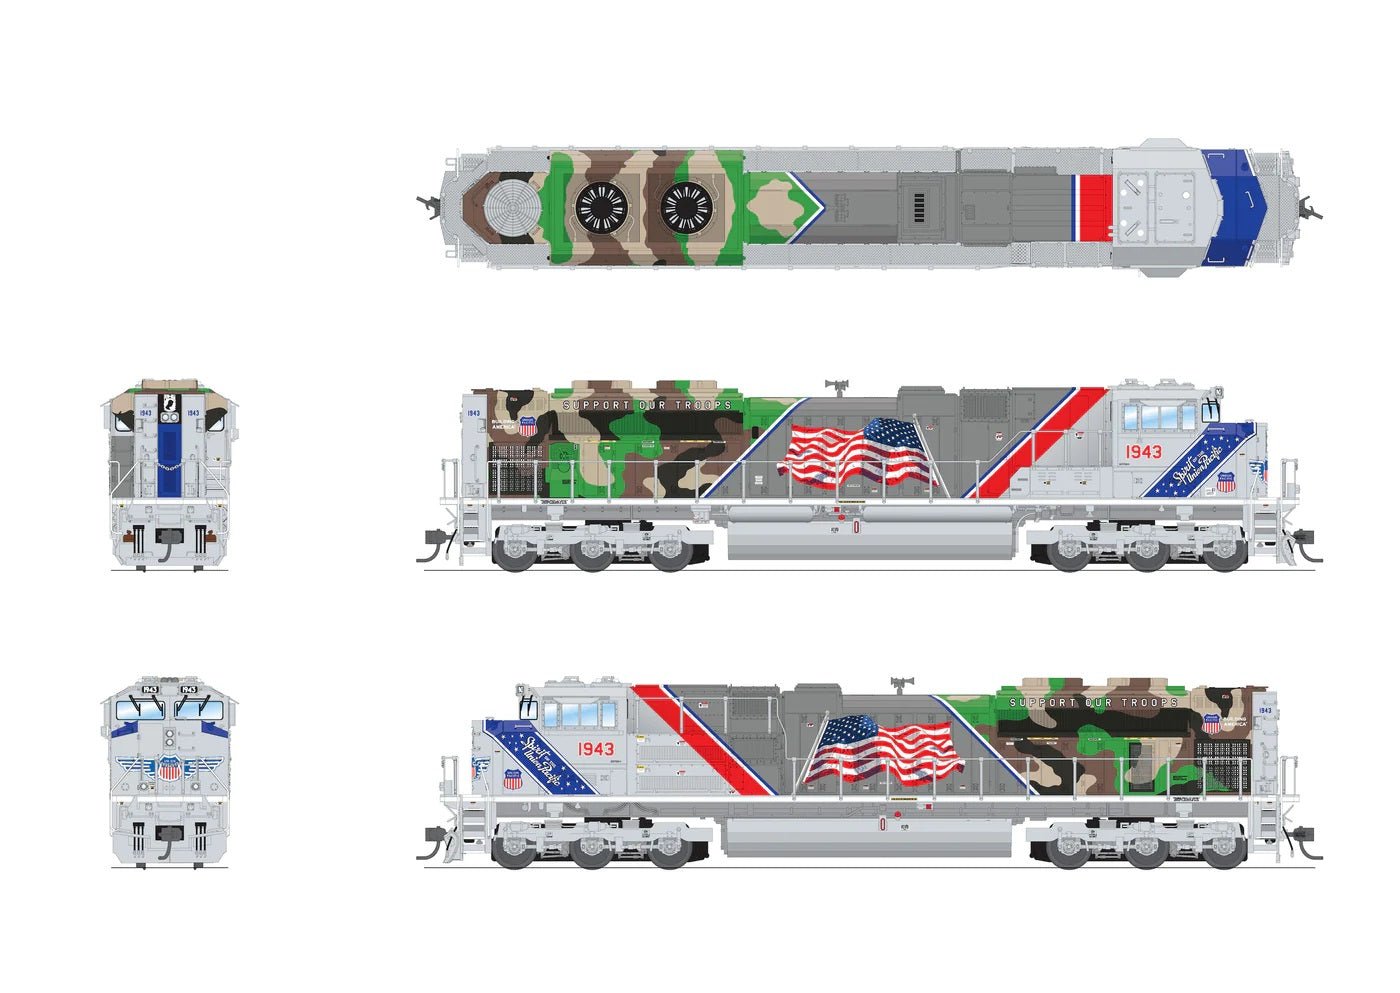 Broadway Limited EMD SD70ACe Union Pacific #1943 "Support Our Troops" Paragon 4 Sound/DC/DCC w/Smoke, HO Scale - Pre - Order